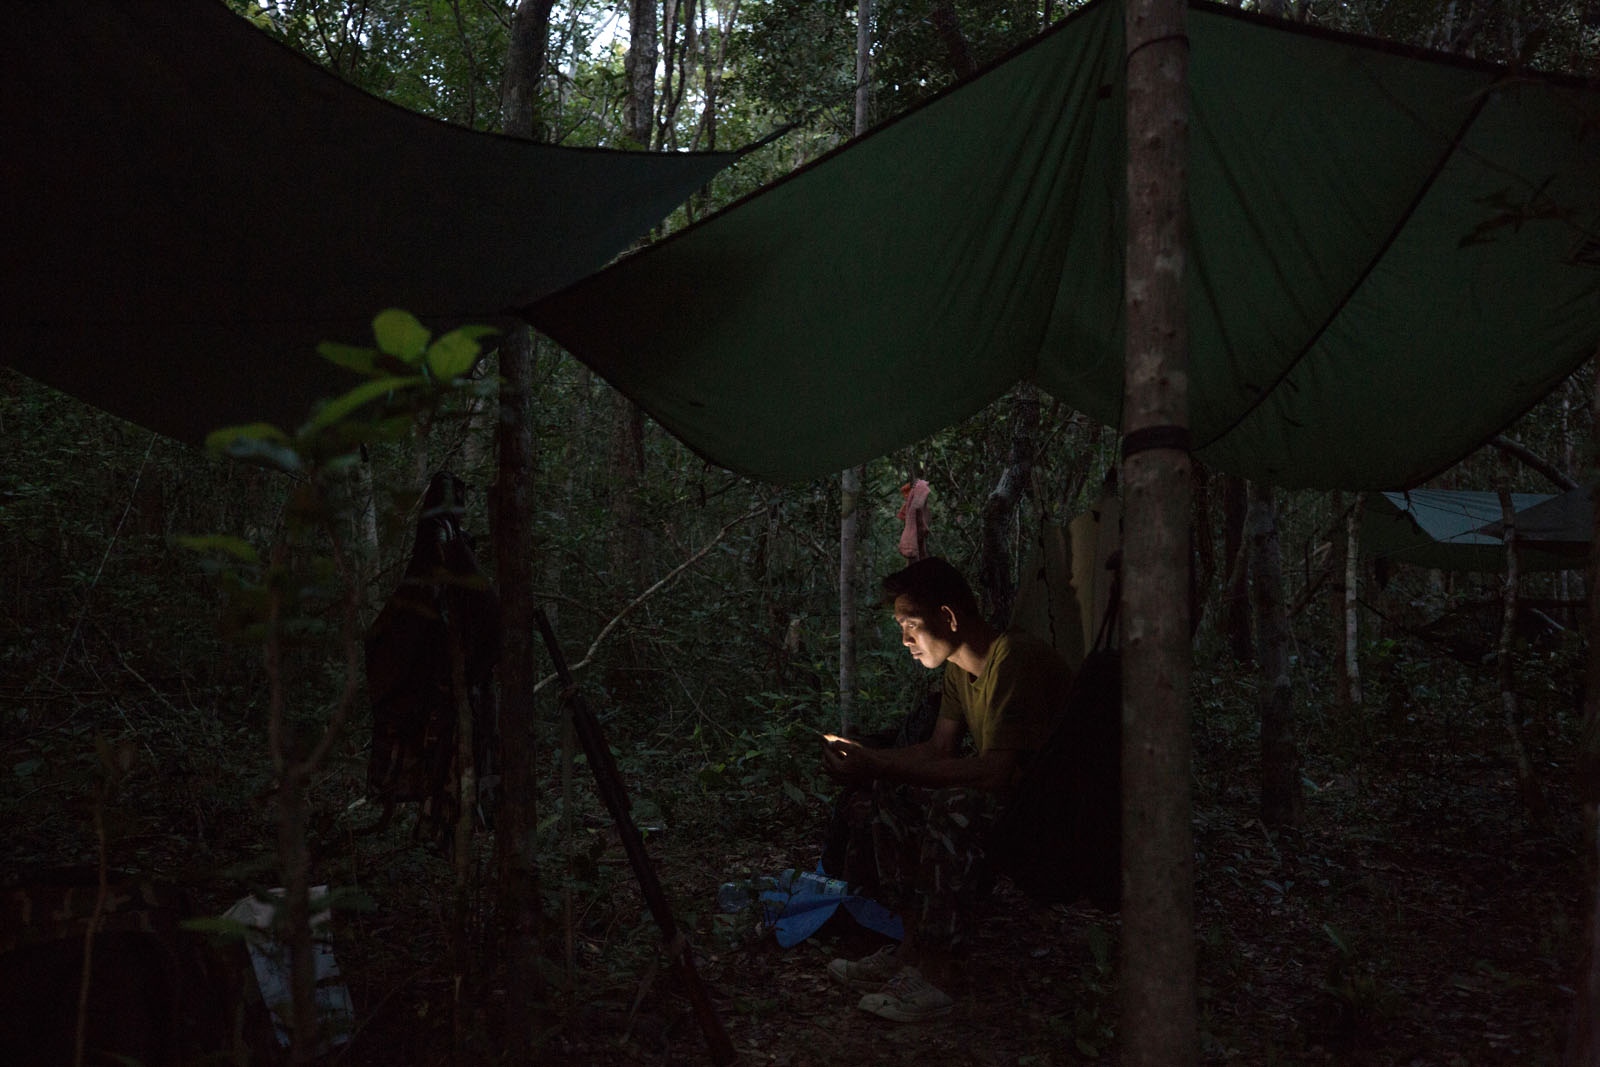 THAILAND'S FOREST RANGERS - Sompob Khamprakon, 37, rests at camp looking at photos on...